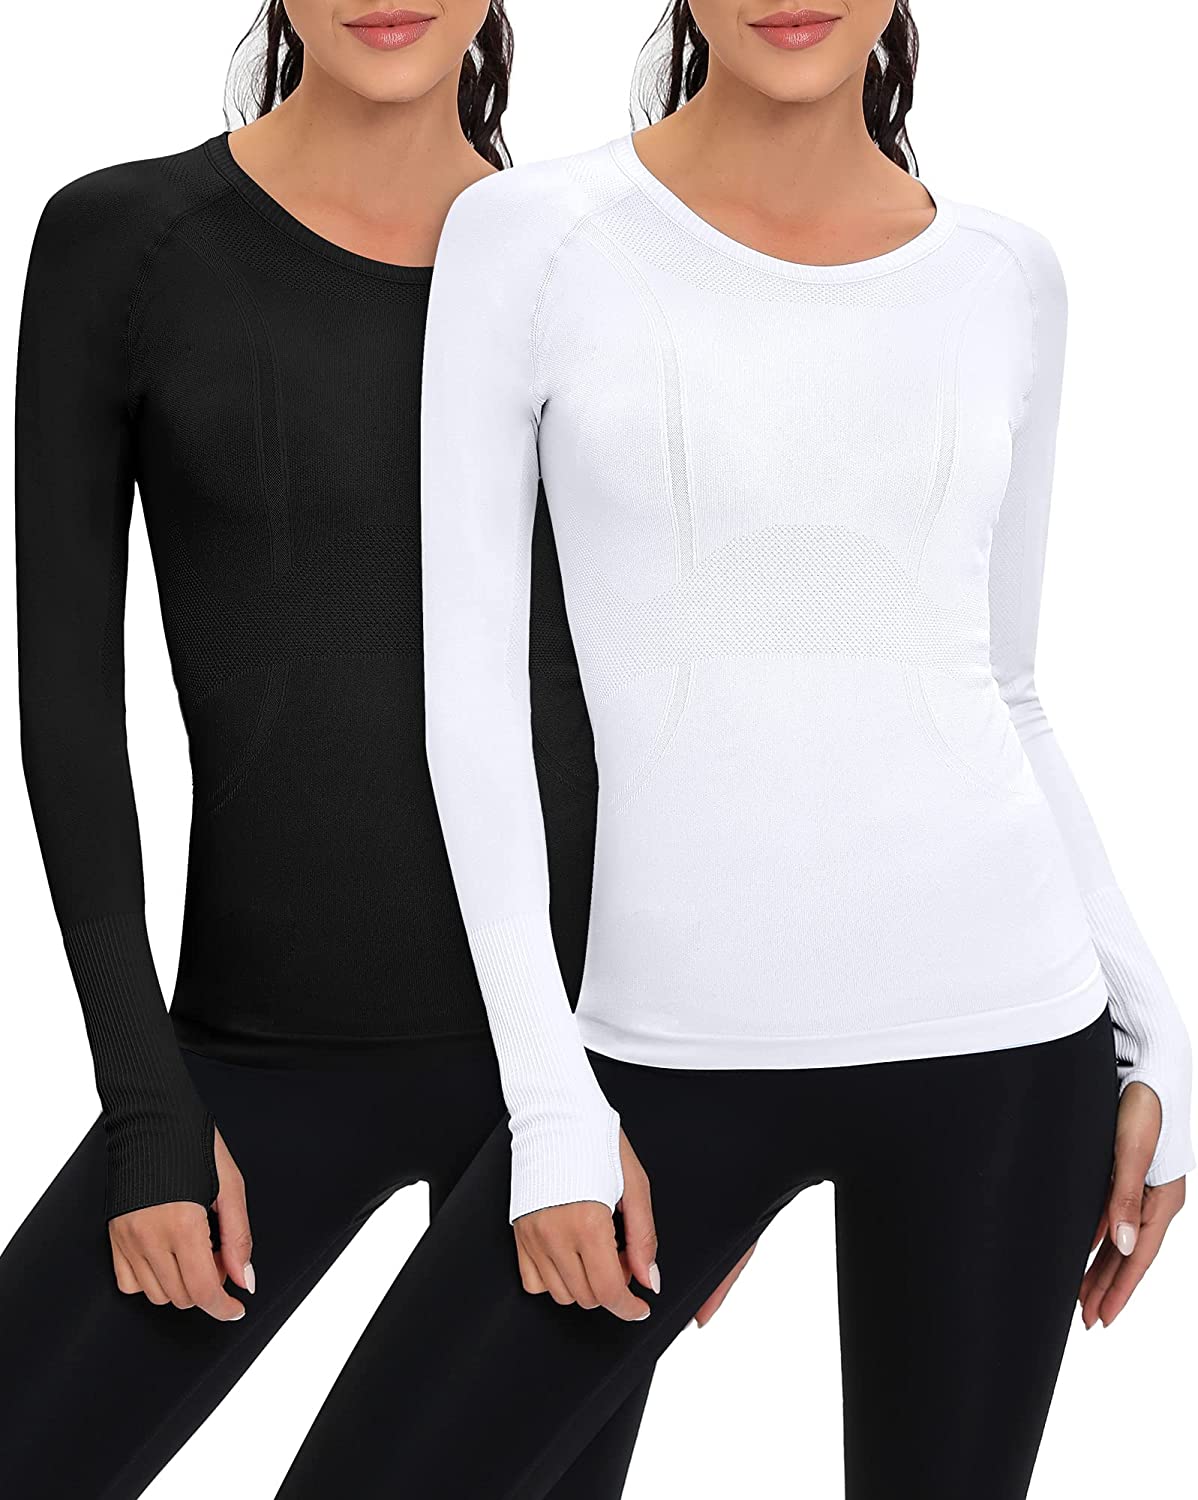  Workout Shirts Women Short Sleeve Tops Compression